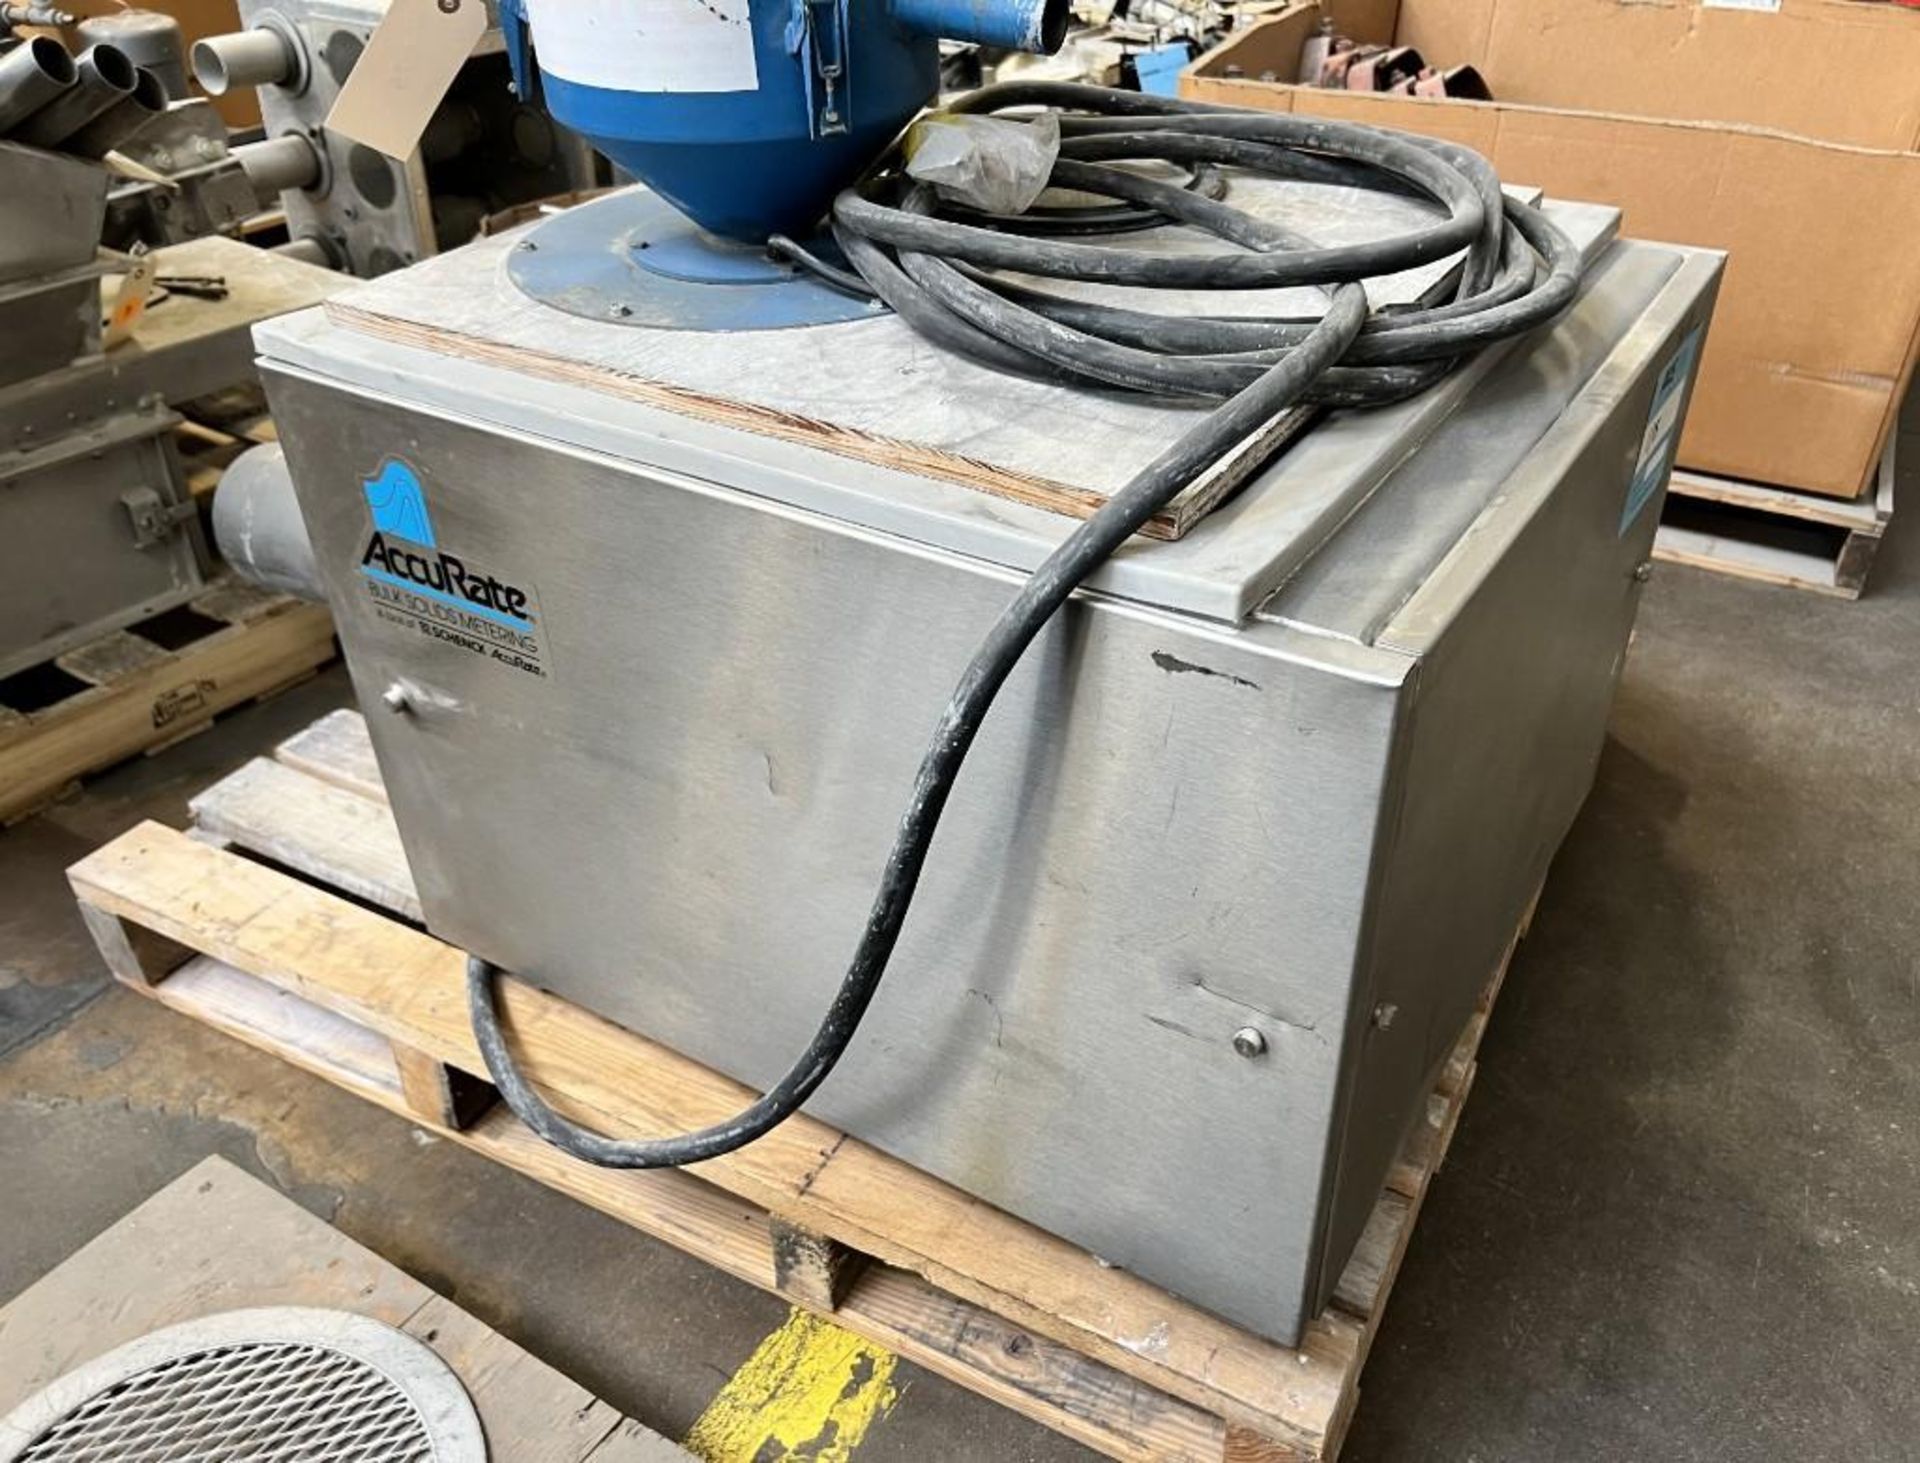 Lot Consisting Of (1) Accu-Rate feeder, (3) vacuum loaders. (Rigging/Loading Fee = $100) - Image 4 of 8